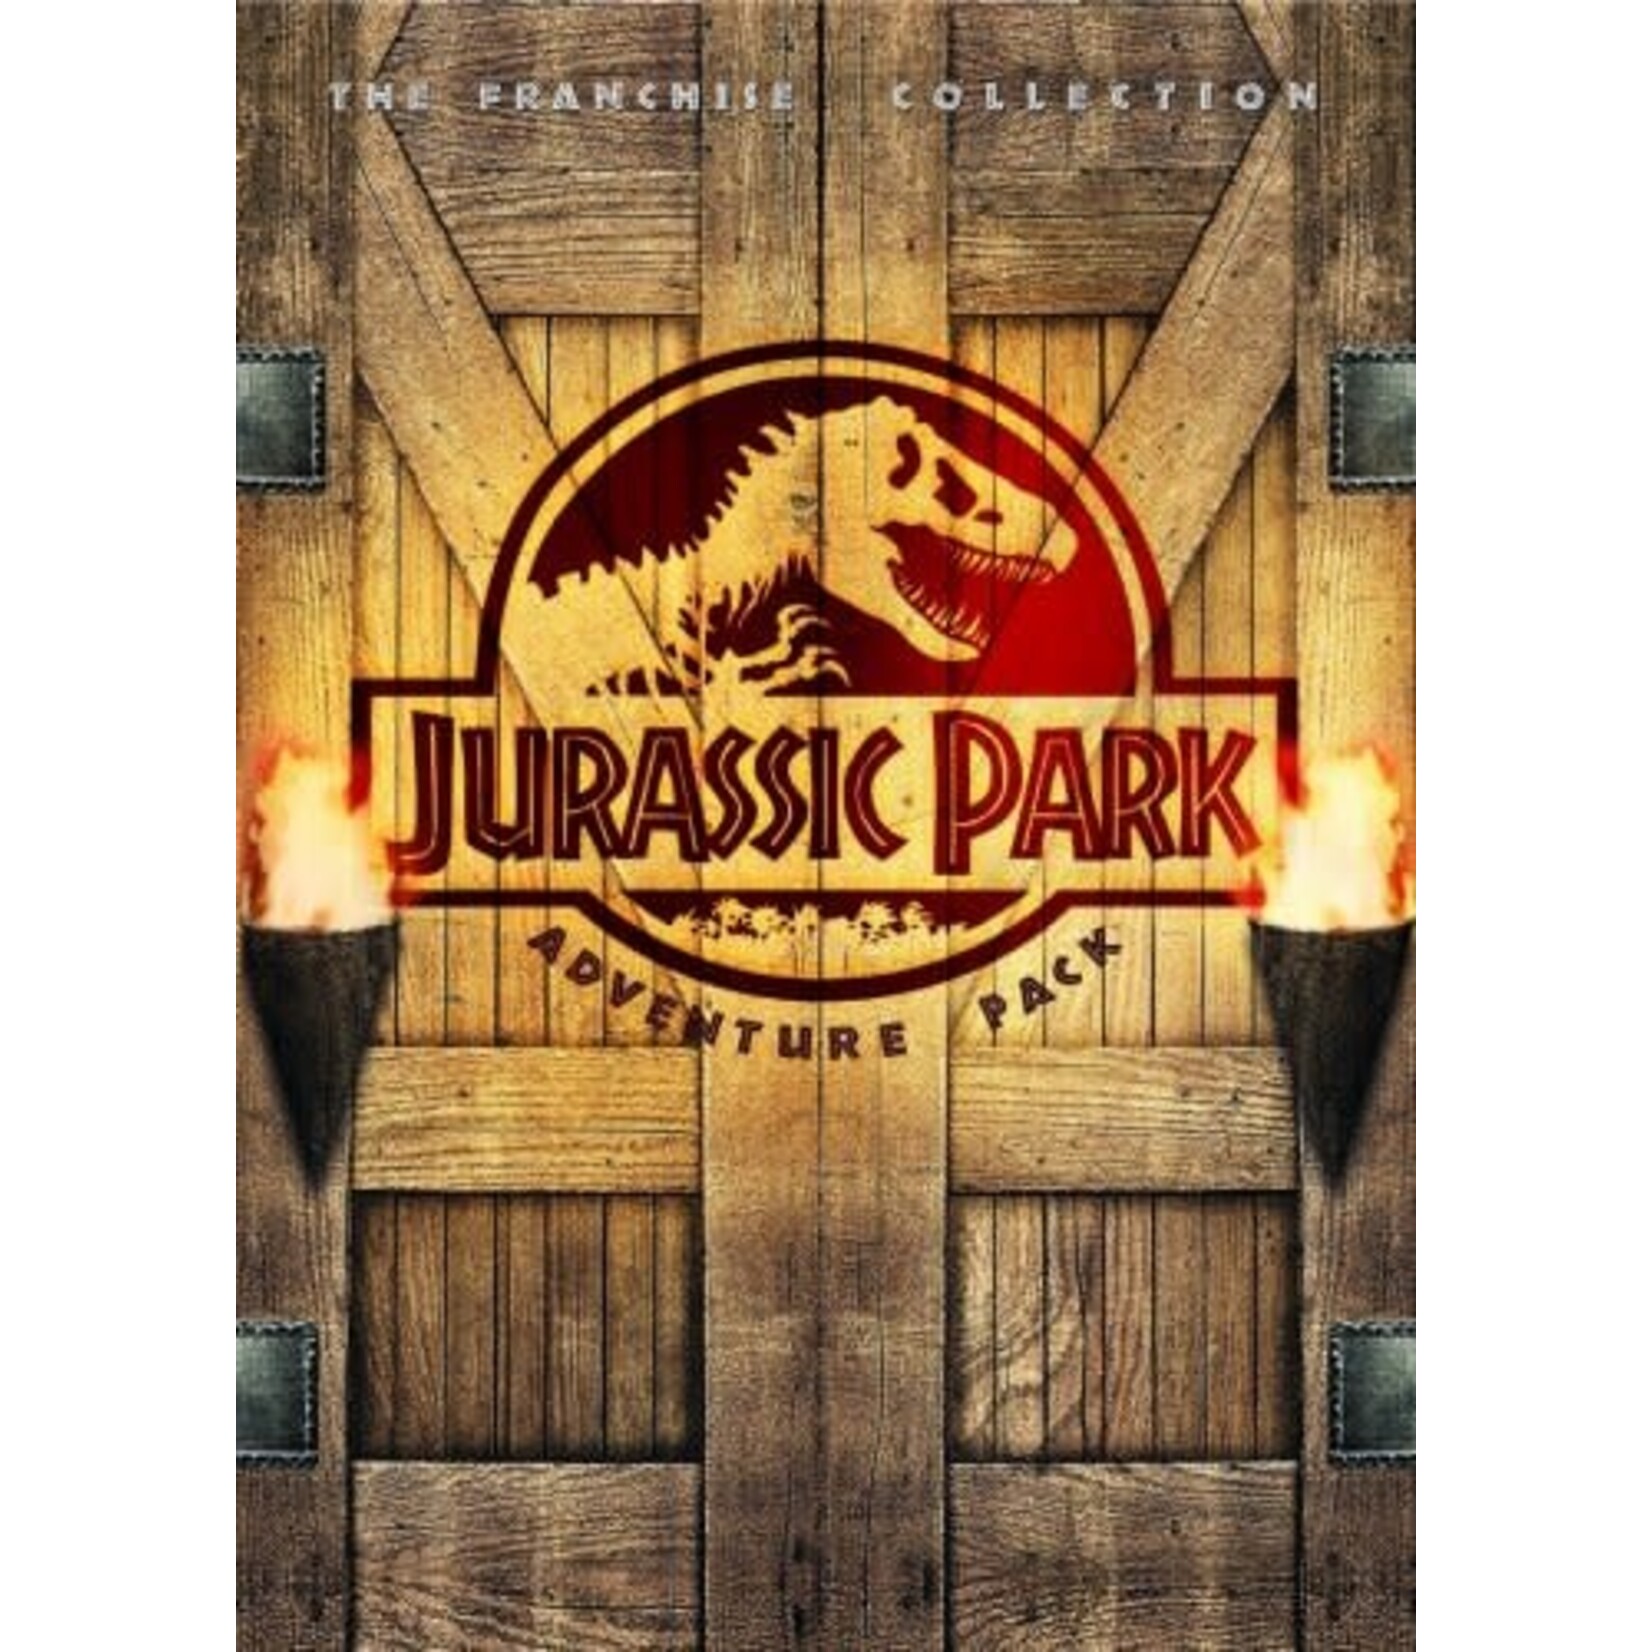 Jurassic Park - Adventure Pack: The Franchise Collection [USED 3DVD]